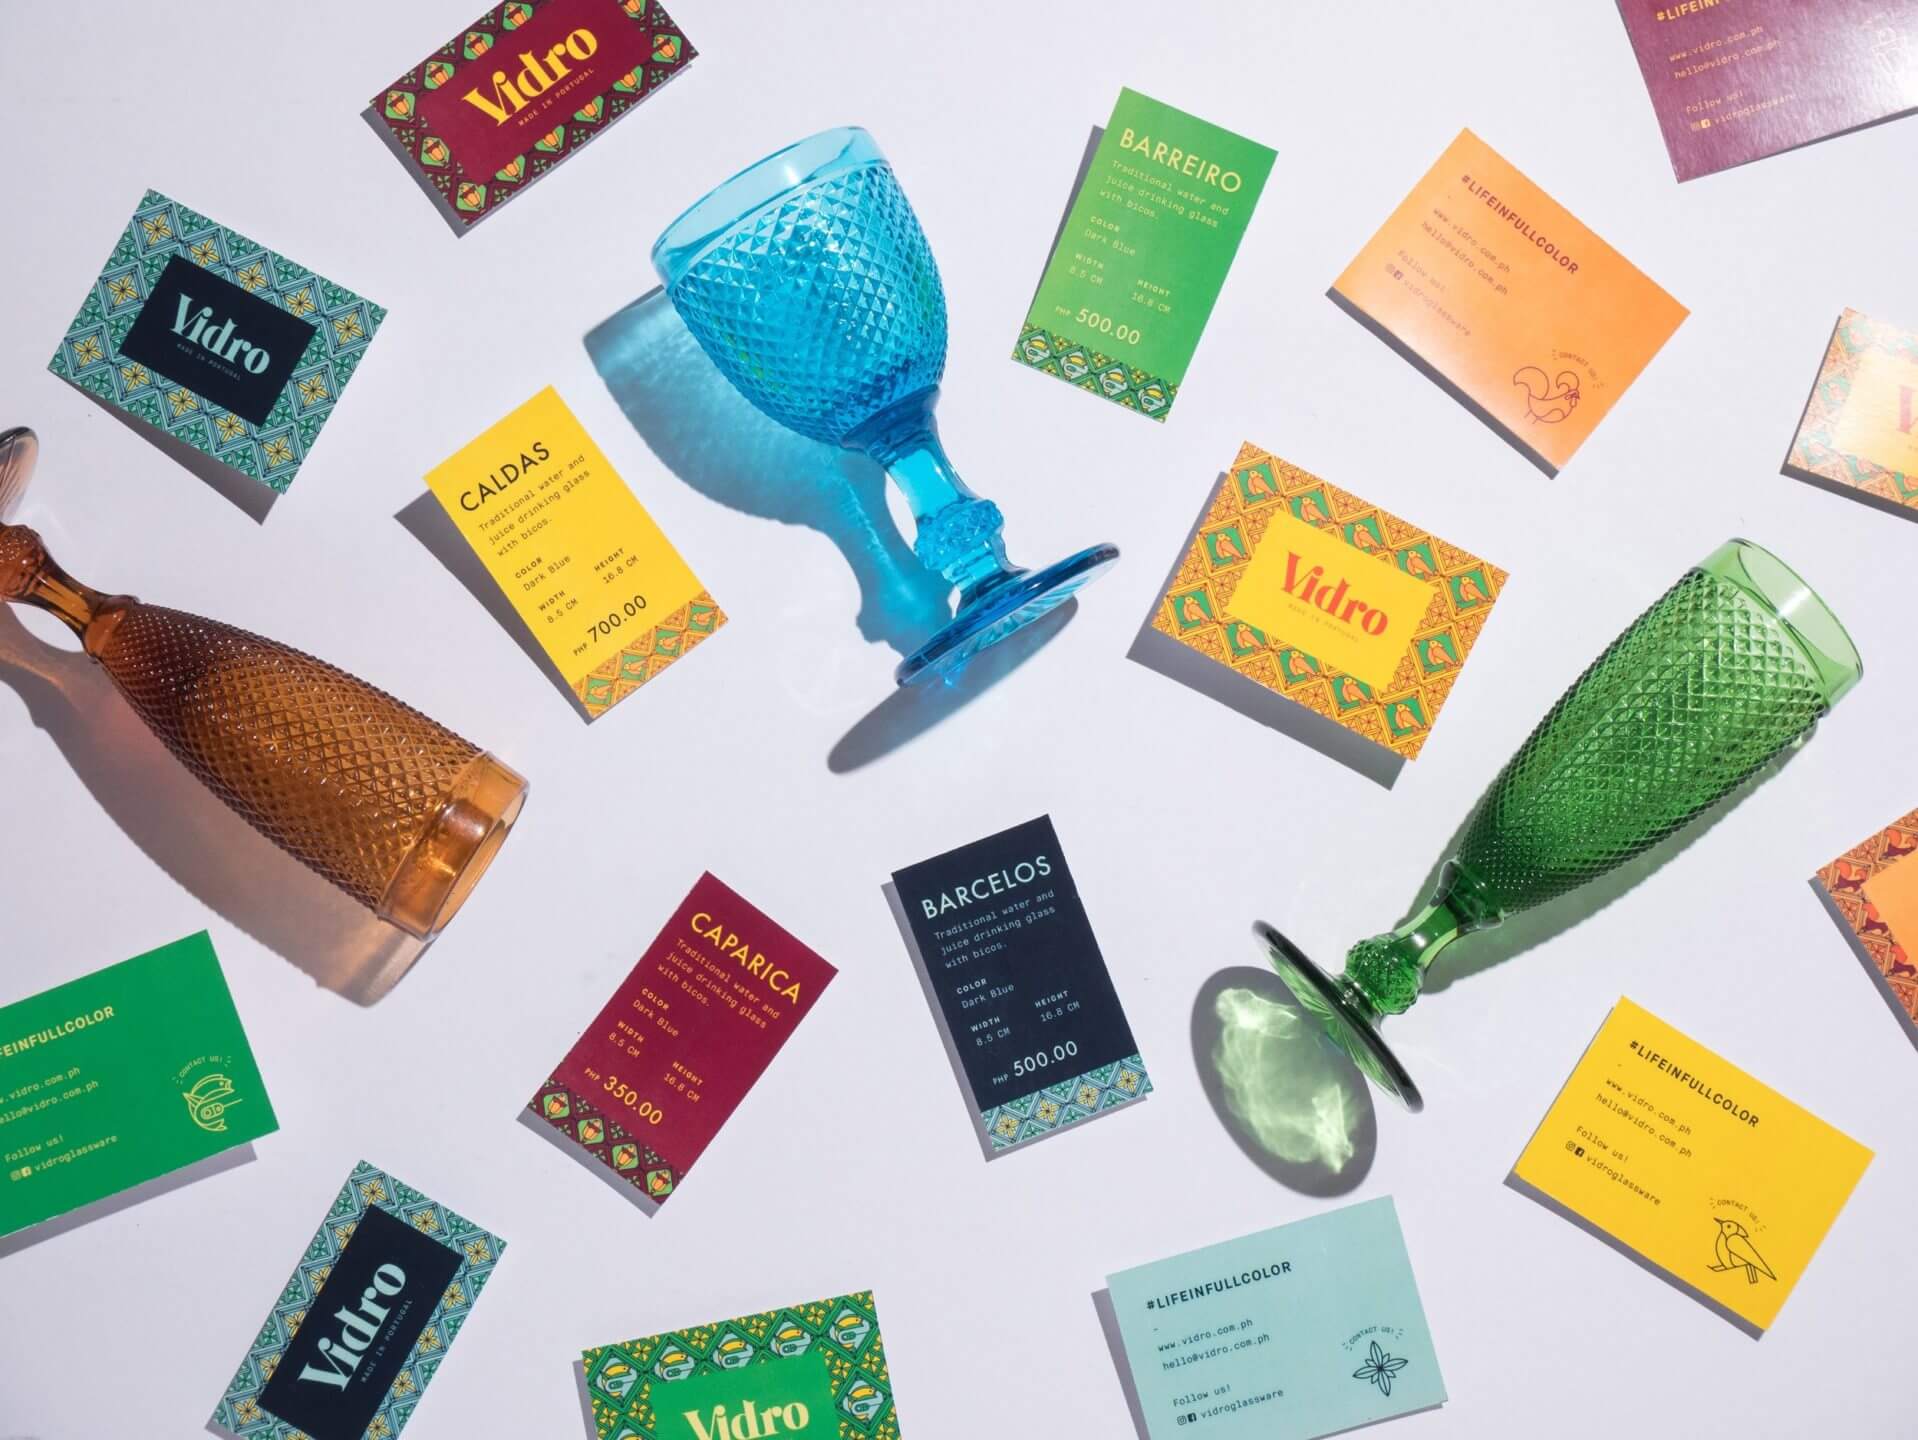 A flatlay of products, product tags, and cards designed for Portuguese glassware brand Vidro